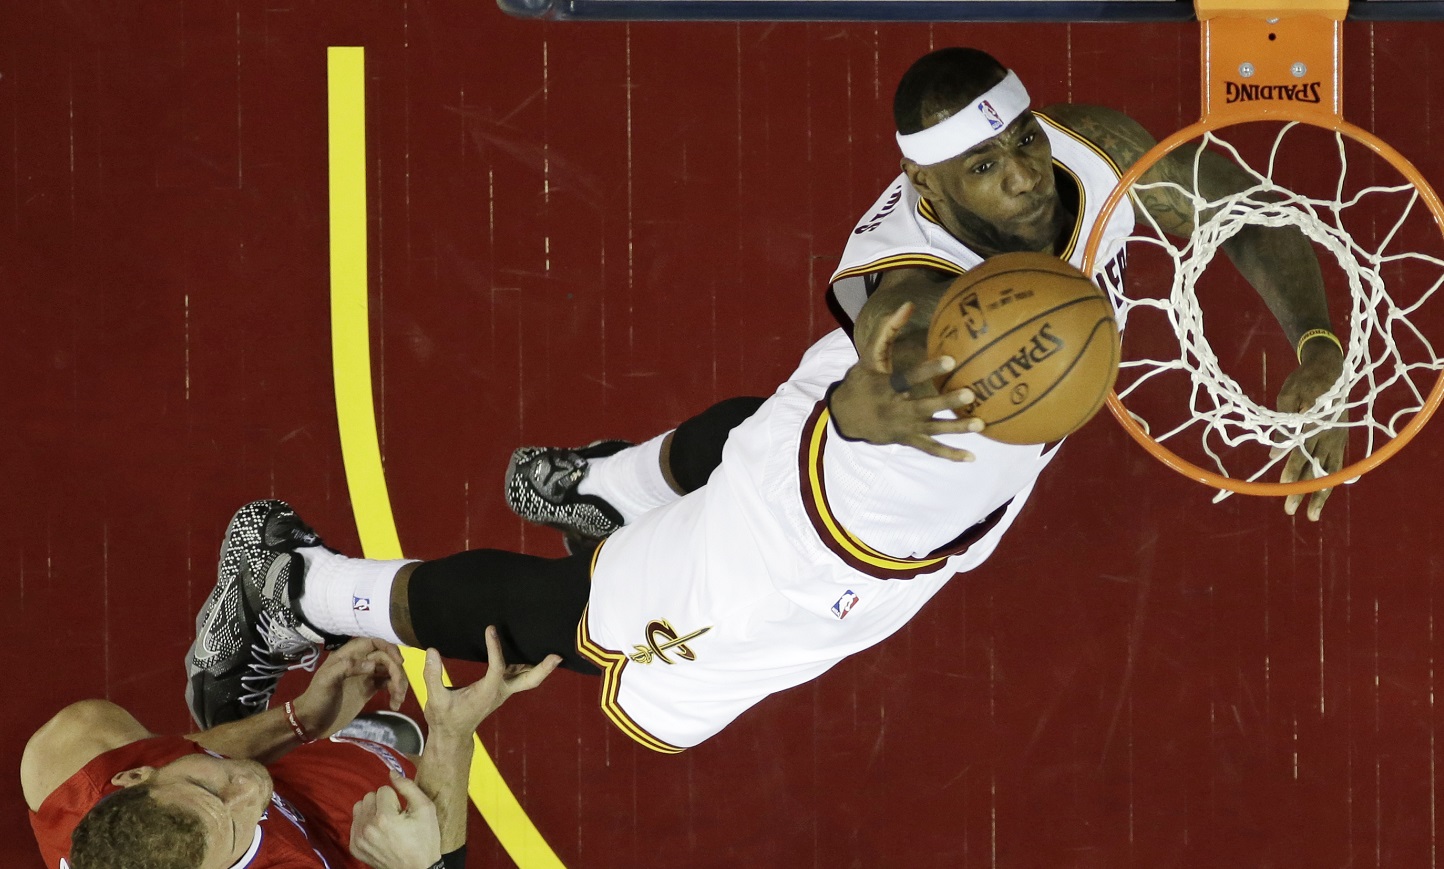 Cleveland Cavaliers' LeBron James, right, dunks the ball in front of Los Angeles Clippers Blake Griffin (32) in the first half of an NBA basketball game Thursday, Feb. 5, 2015, in Cleveland. (AP Photo/Tony Dejak)